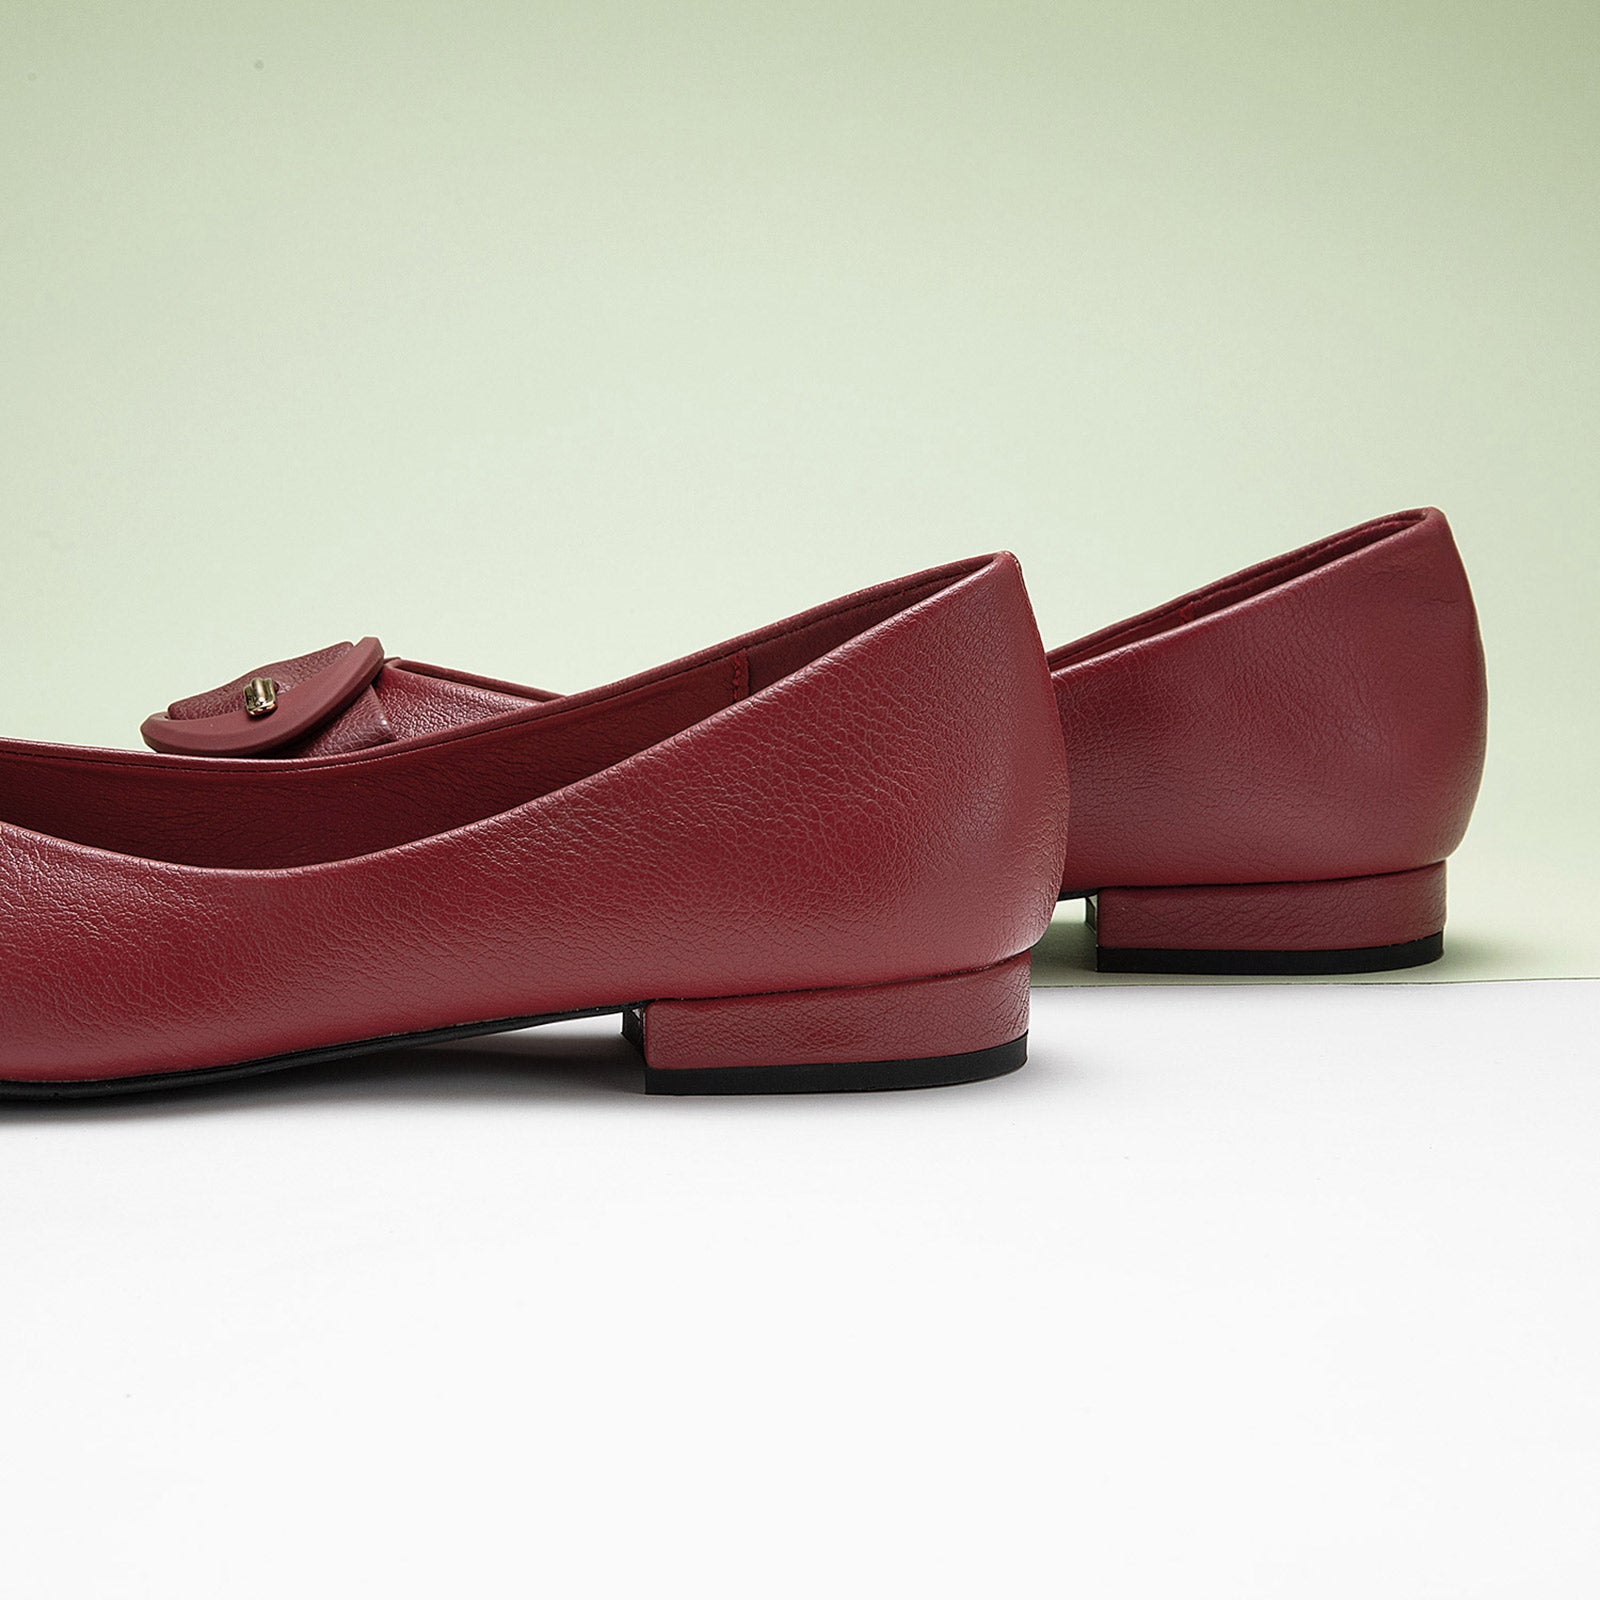 Red Point Toe Flats with grain leather, adding a touch of modernity to your ensemble in a striking color